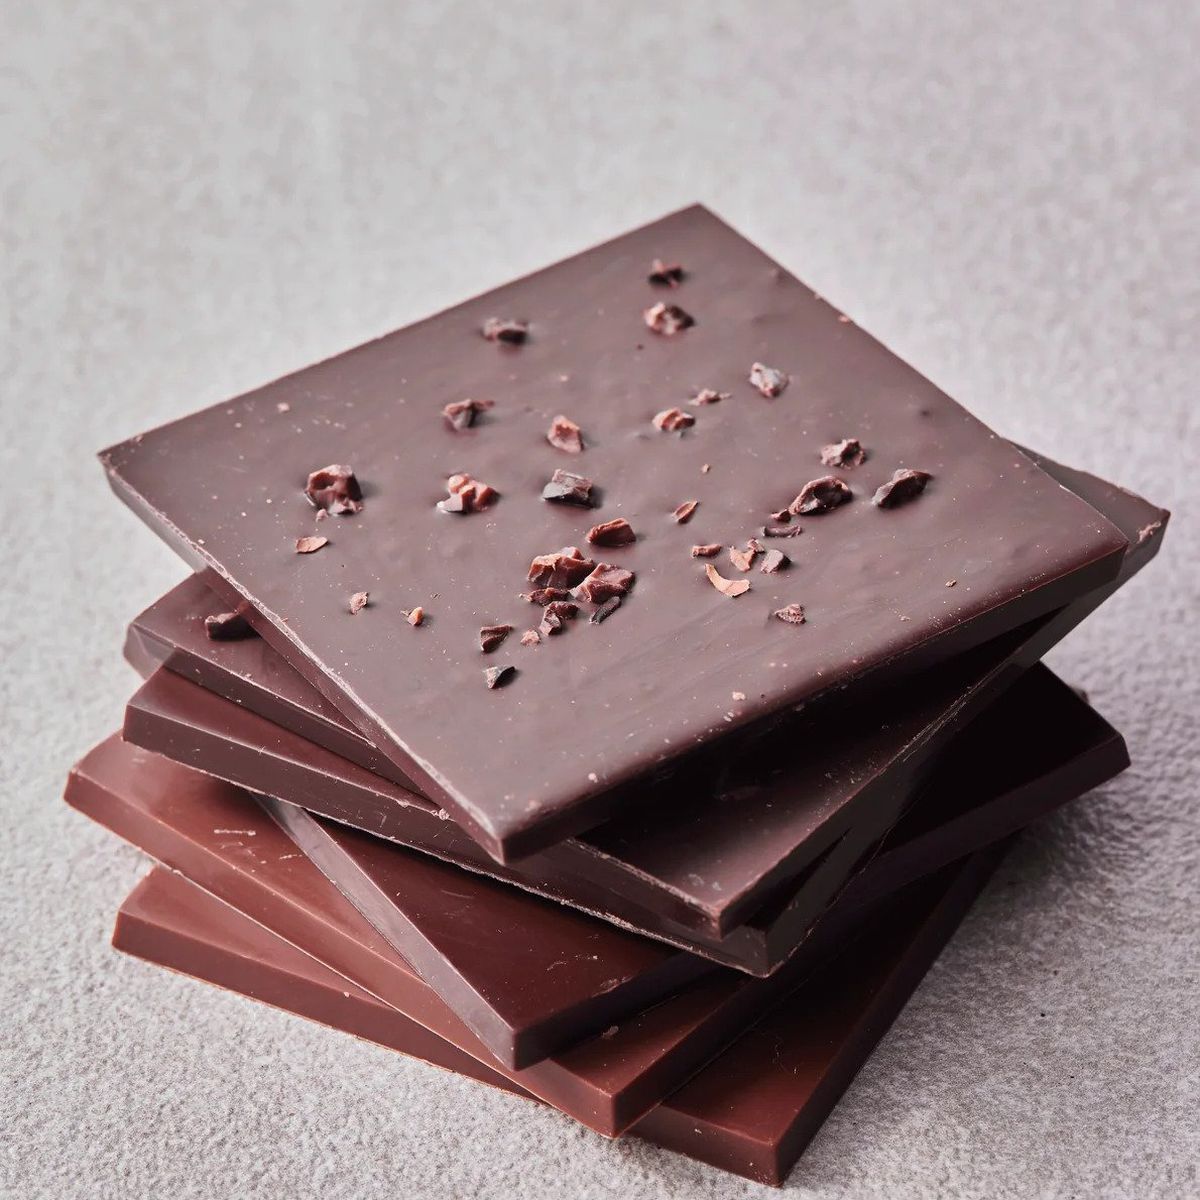 A stack of square pieces of chocolate